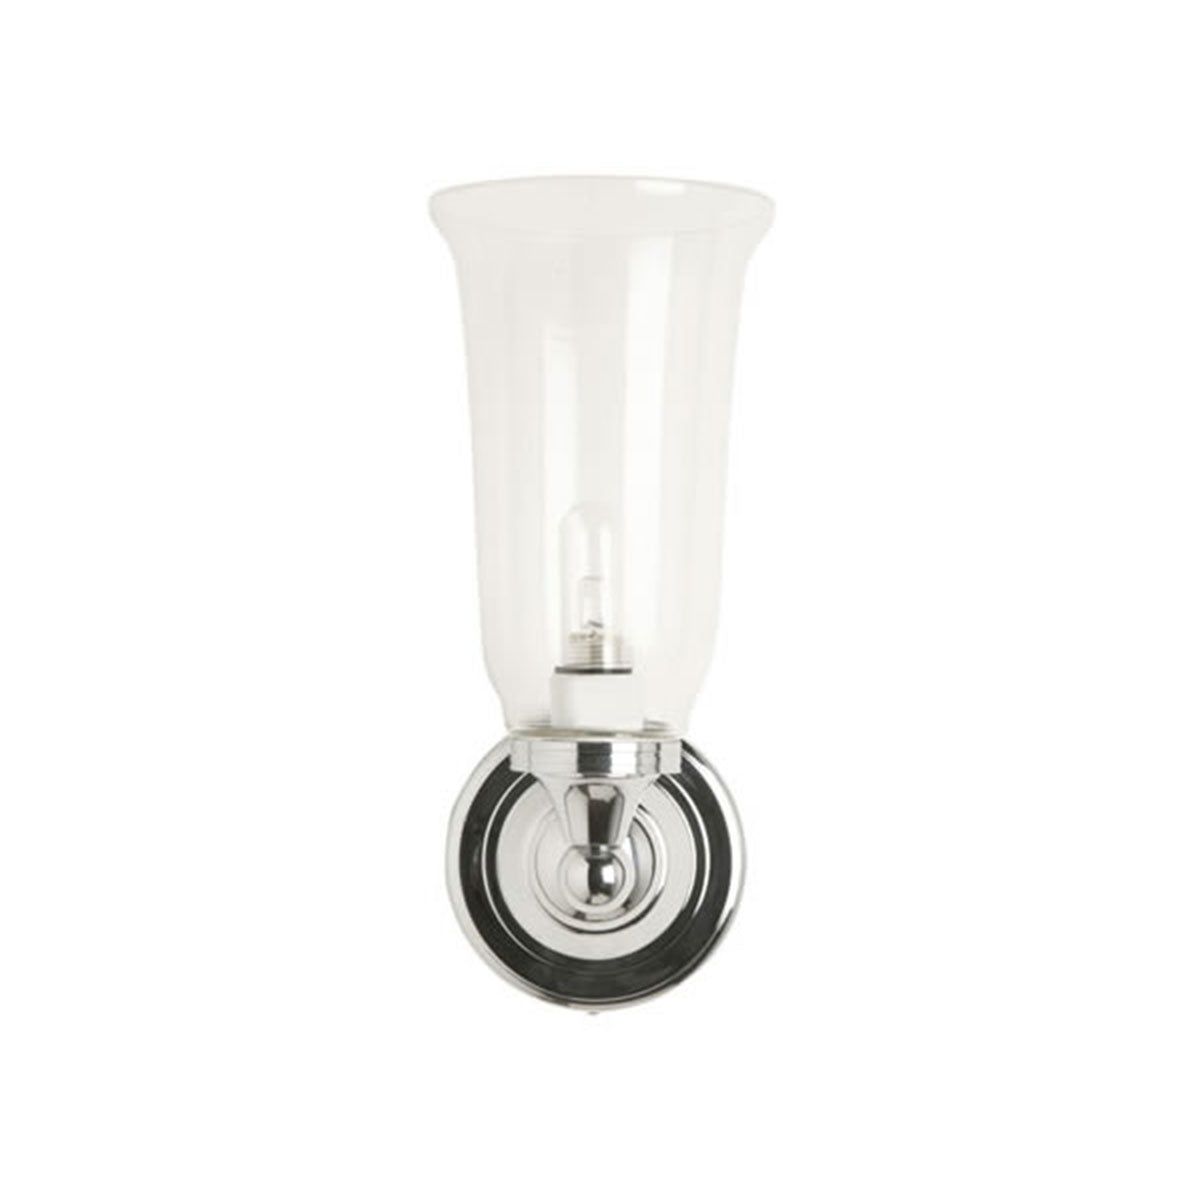 Burlington Round Light With Chrome Base And Clear Glass Vase Shade Deluxe Bathrooms UK